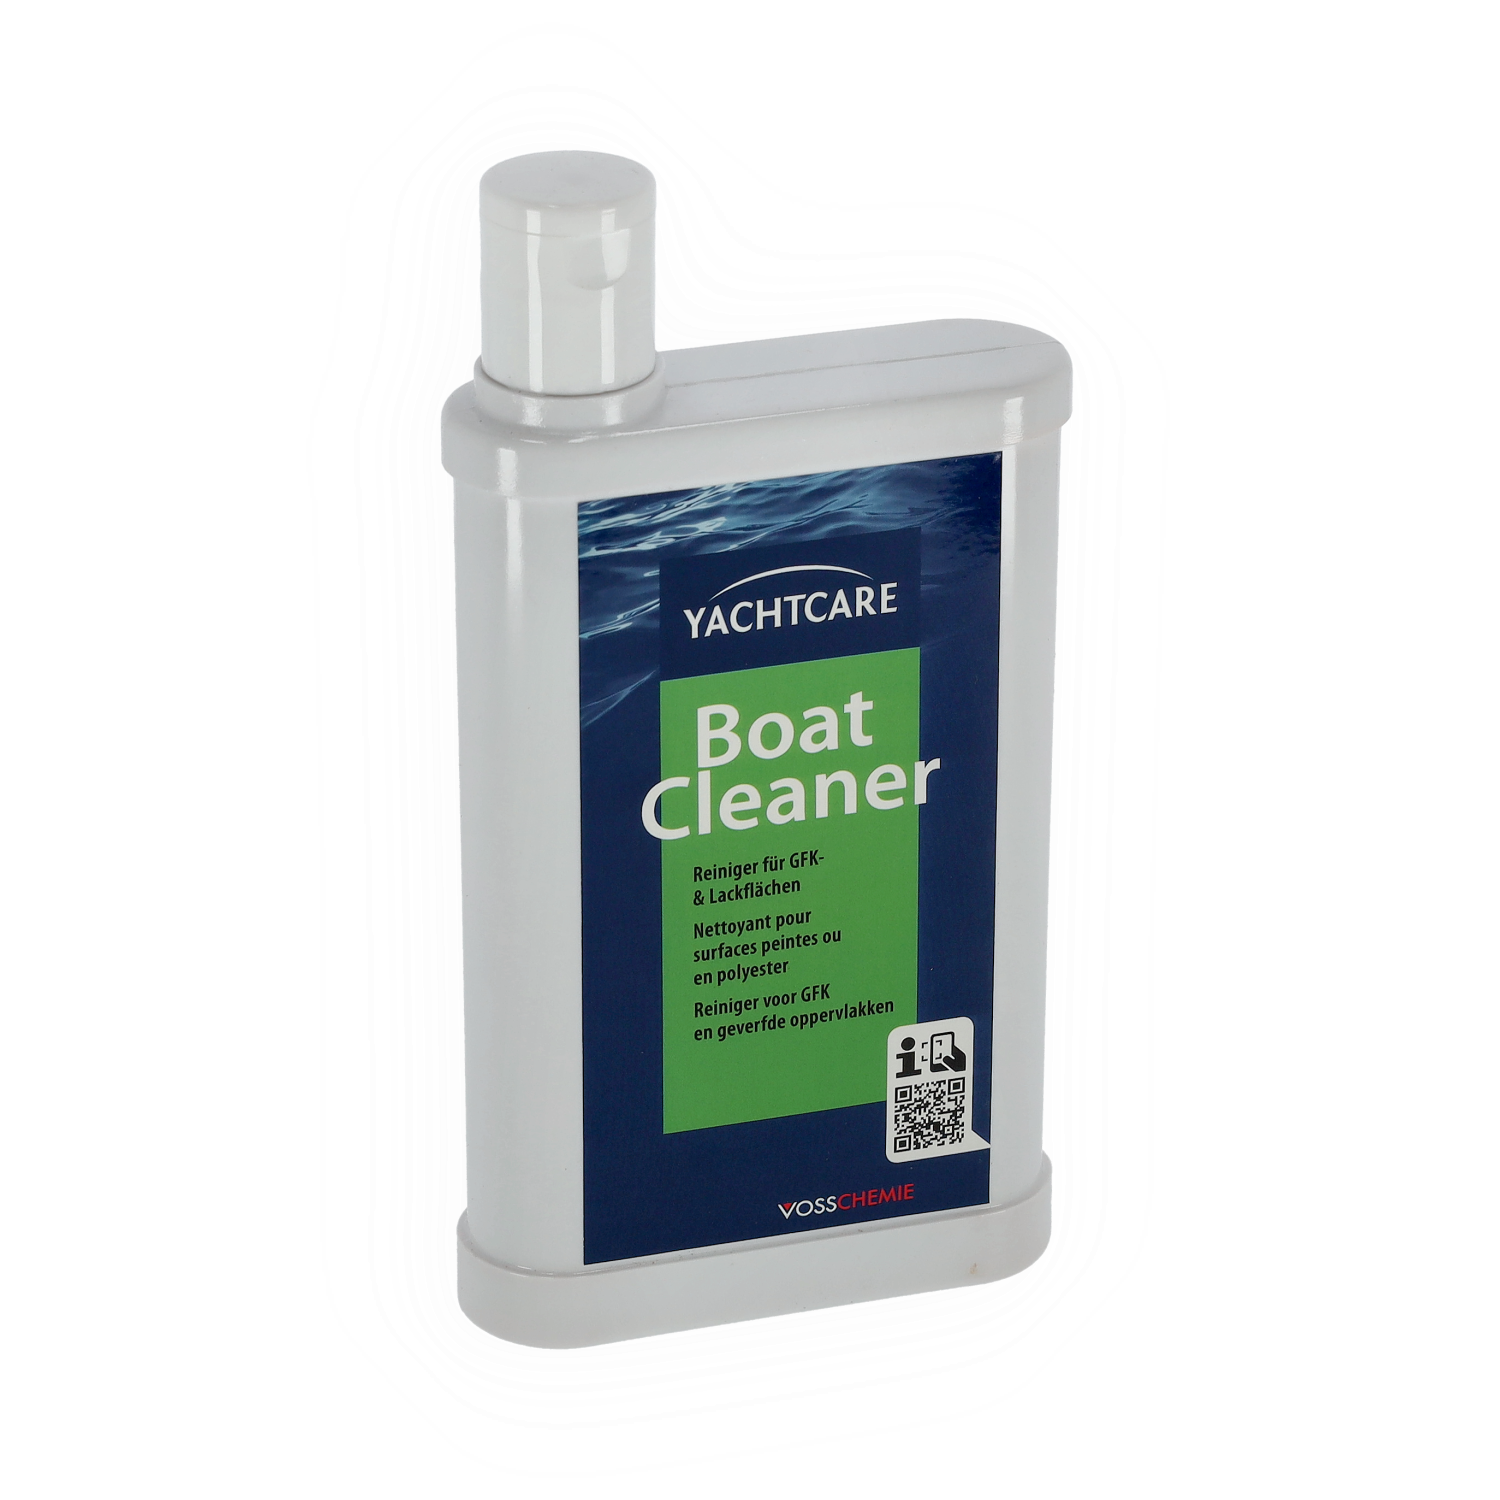 yachtcare boat cleaner